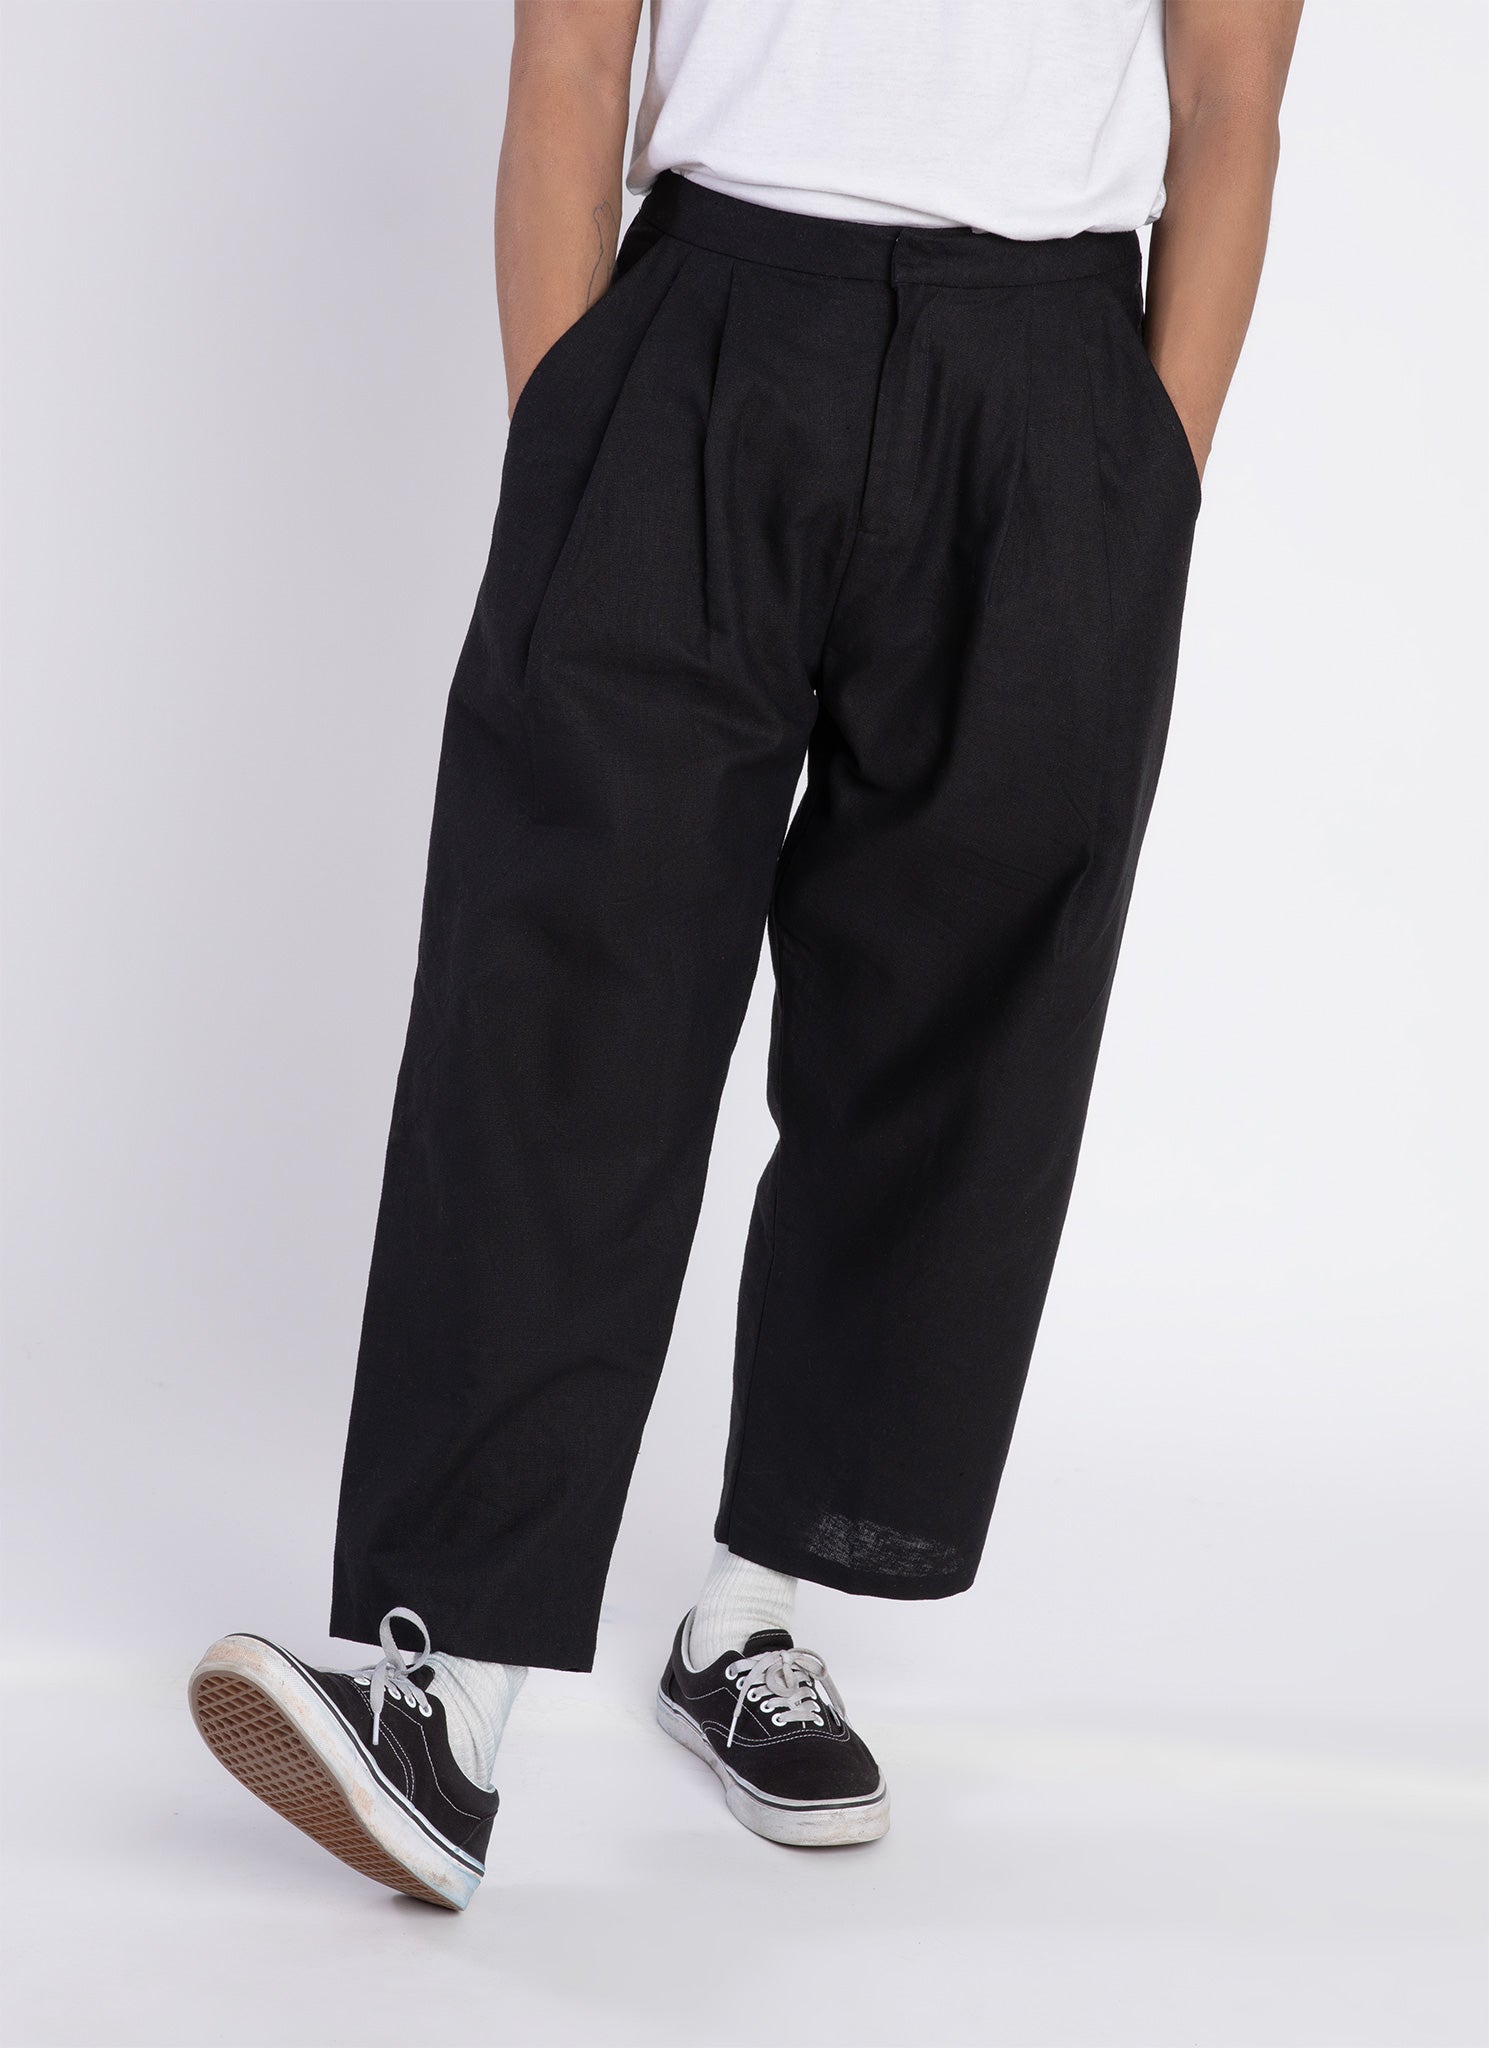 mens tapered cropped pants